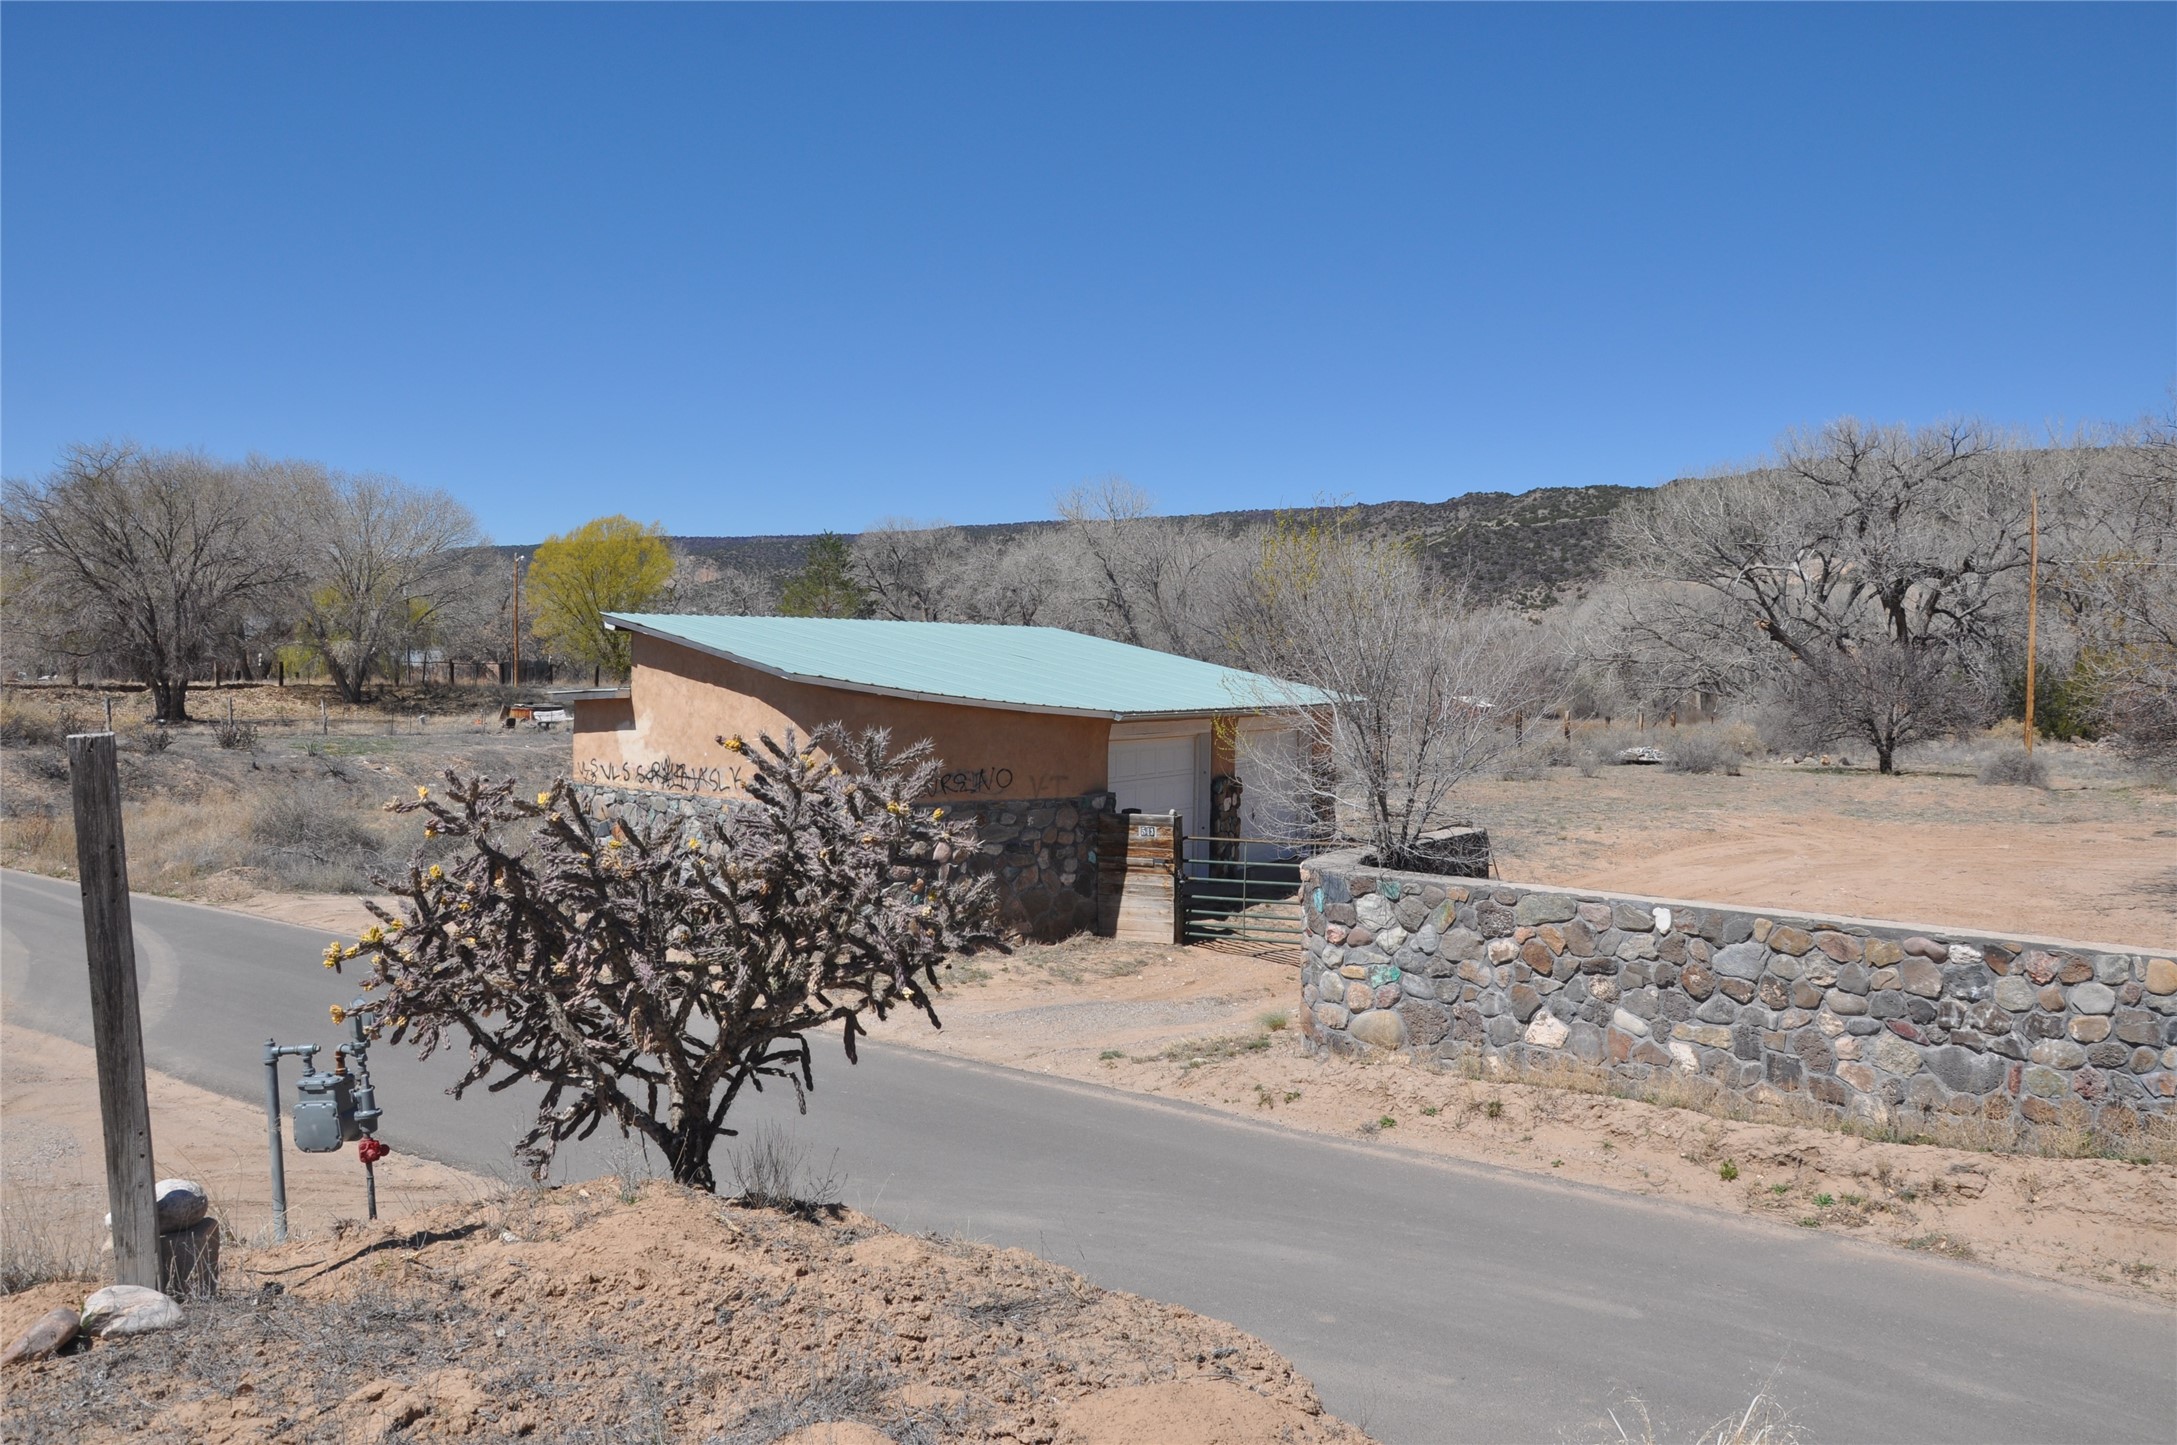 543 County Rd 41, Alcalde, New Mexico 87511, 2 Bedrooms Bedrooms, ,1 BathroomBathrooms,Residential,For Sale,543 County Rd 41,202401449